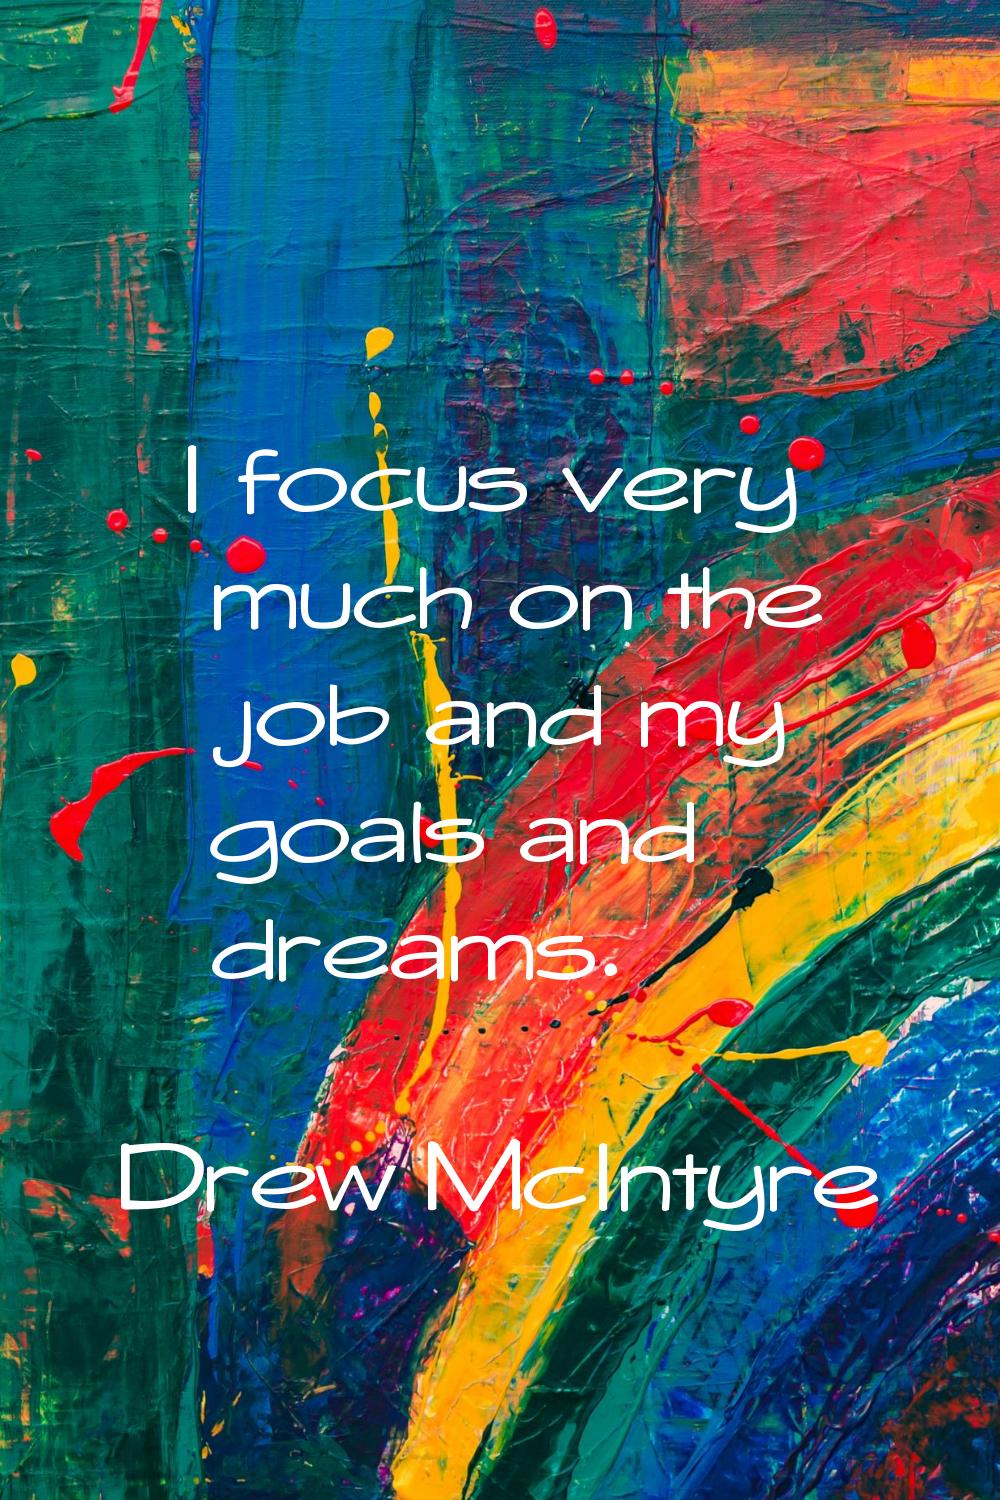 I focus very much on the job and my goals and dreams.